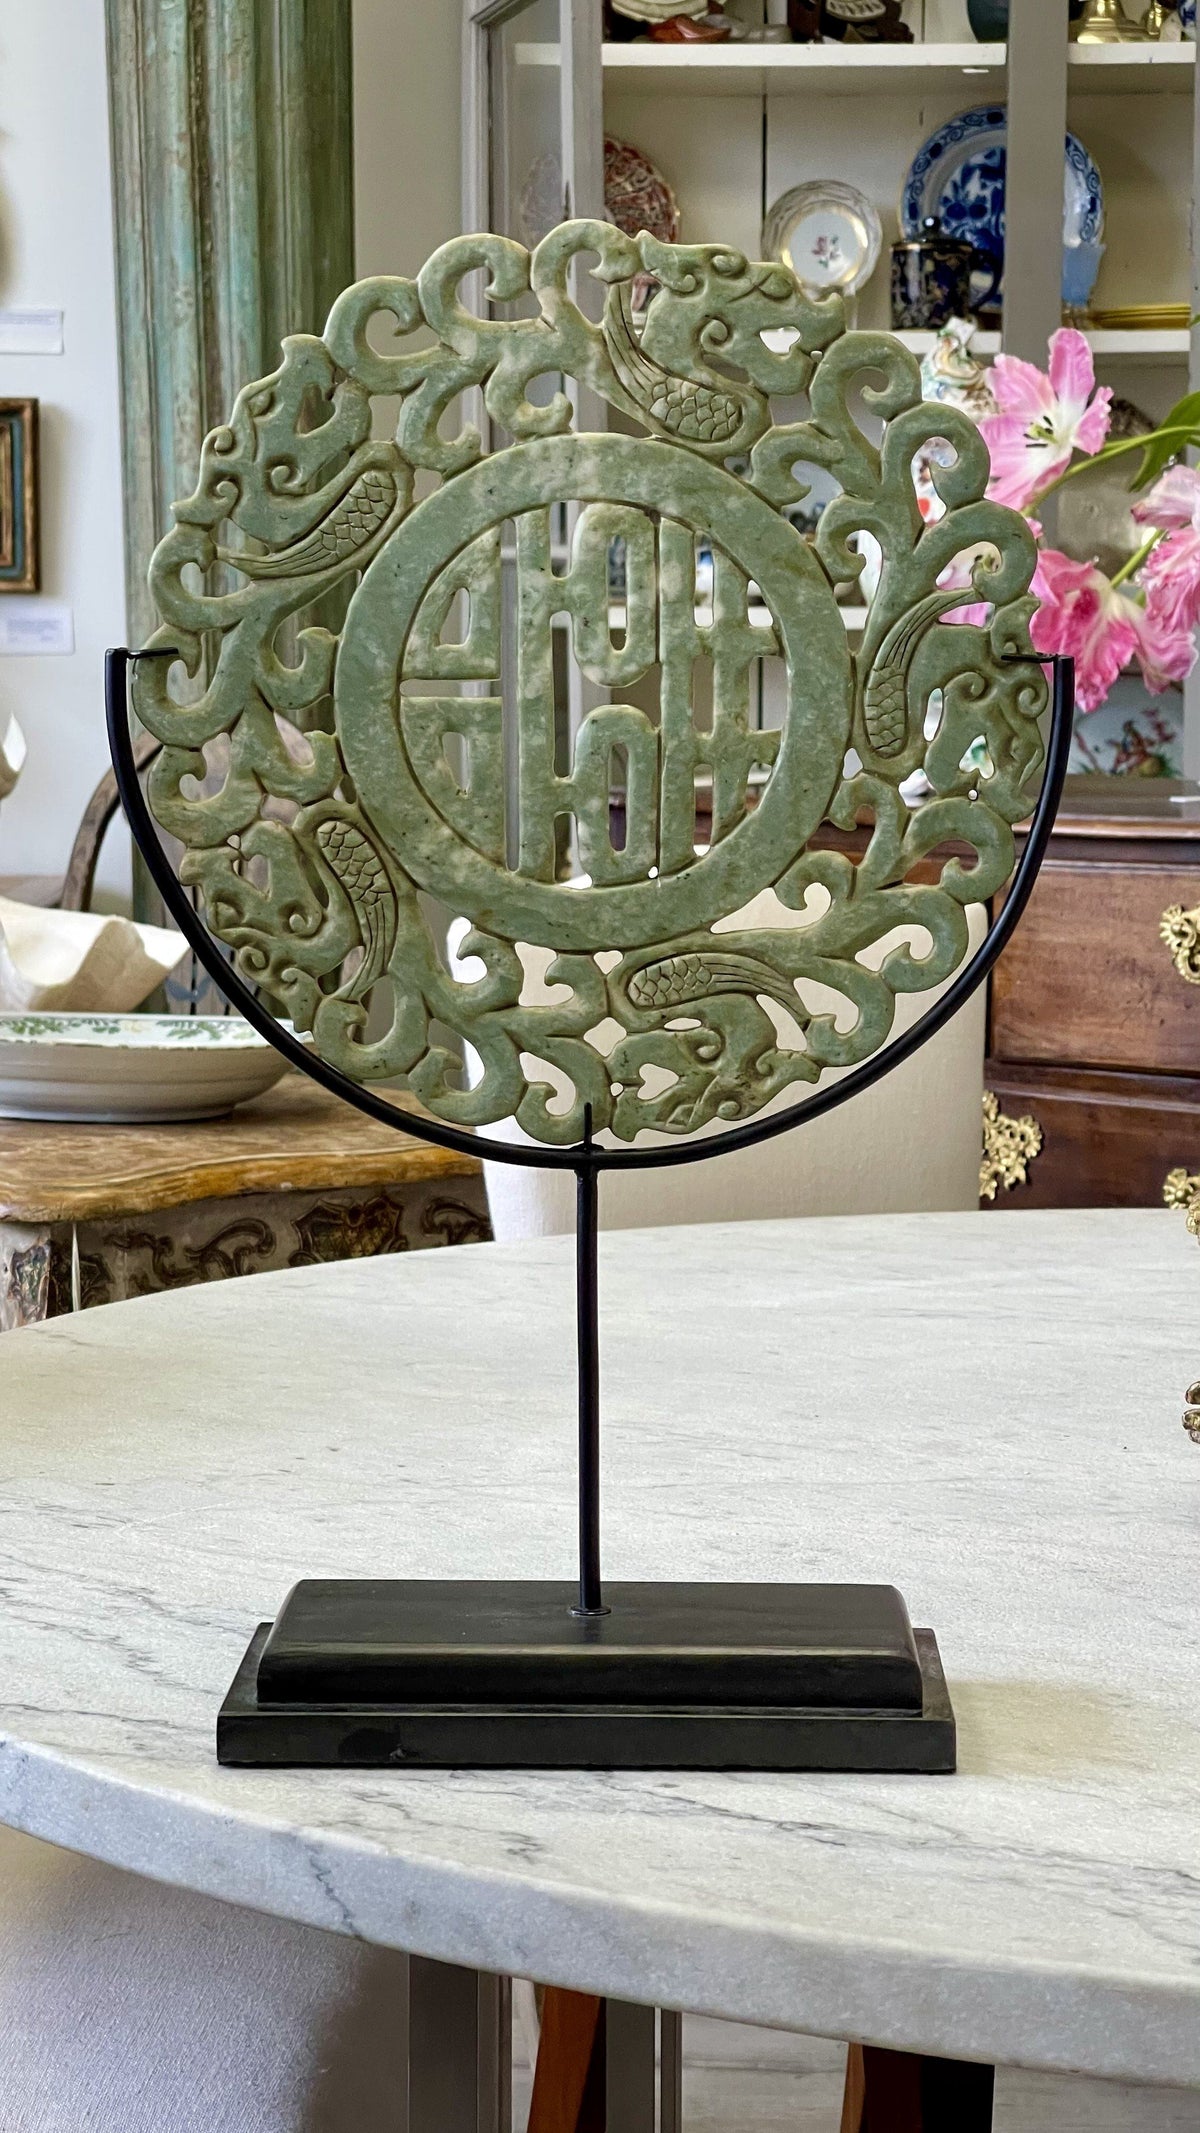 Sculptural - CARVED CHINESE MEDALLION ON STAND